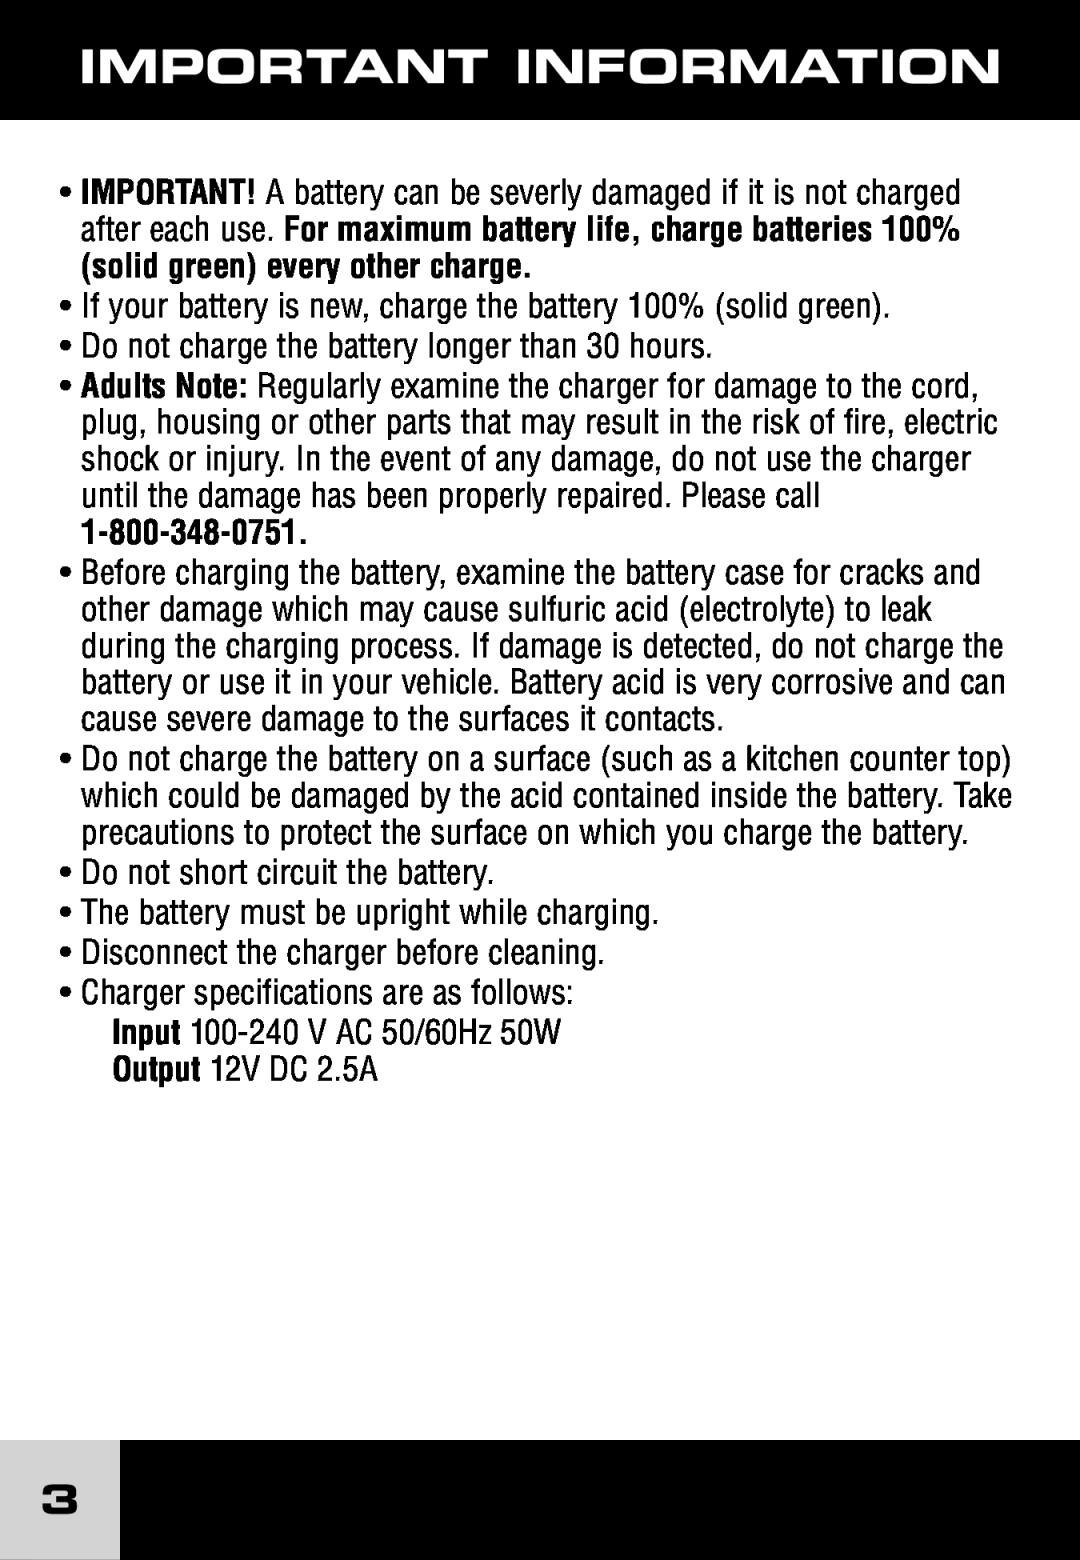 Fisher-Price H7461, J1718 Important Information, If your battery is new, charge the battery 100% solid green 